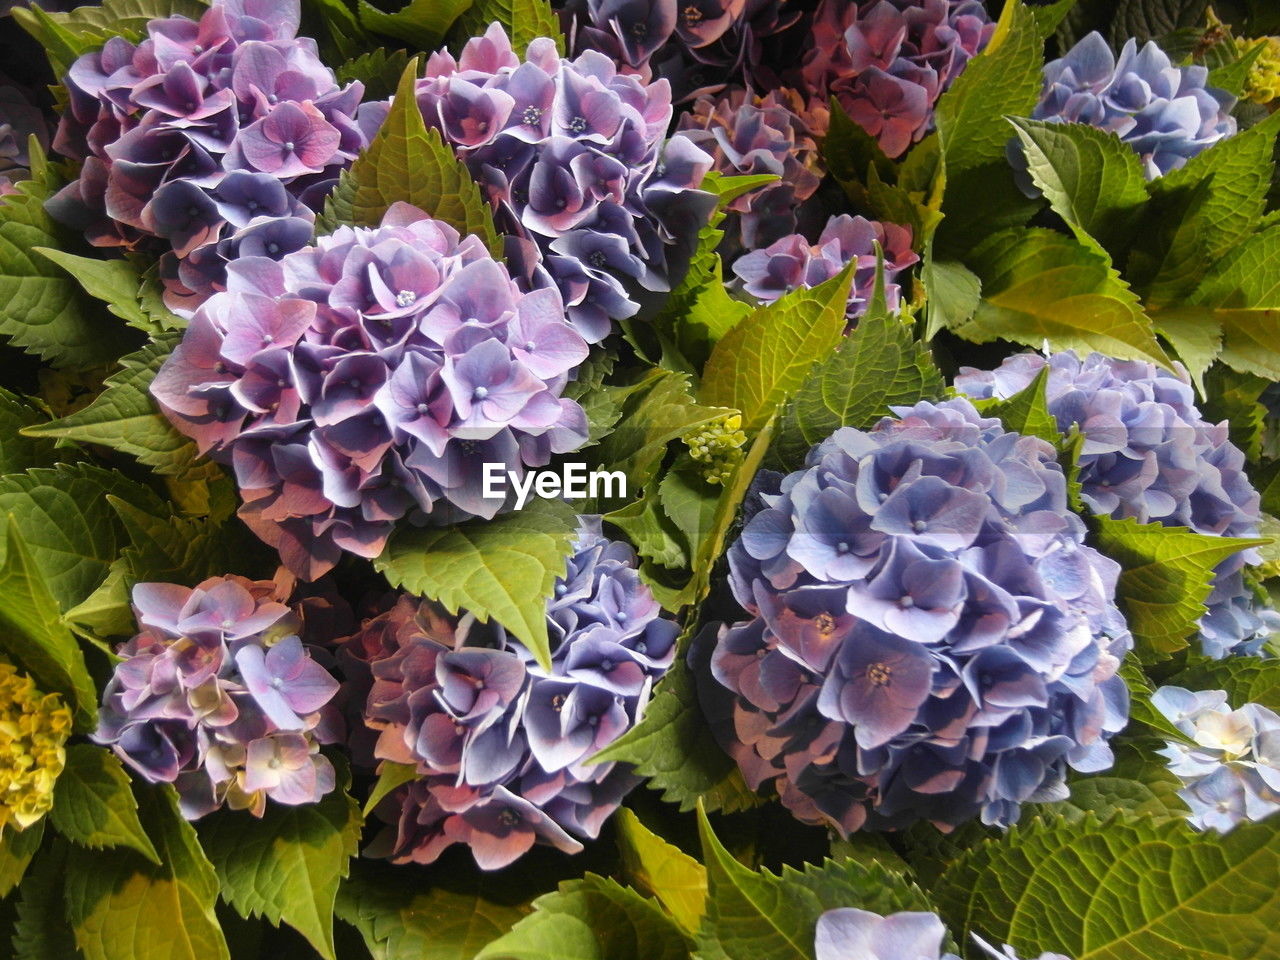 flower, plant, growth, beauty in nature, nature, leaf, plant part, no people, freshness, high angle view, flowering plant, hydrangea, close-up, day, purple, outdoors, fragility, vegetable, full frame, flower head, petal